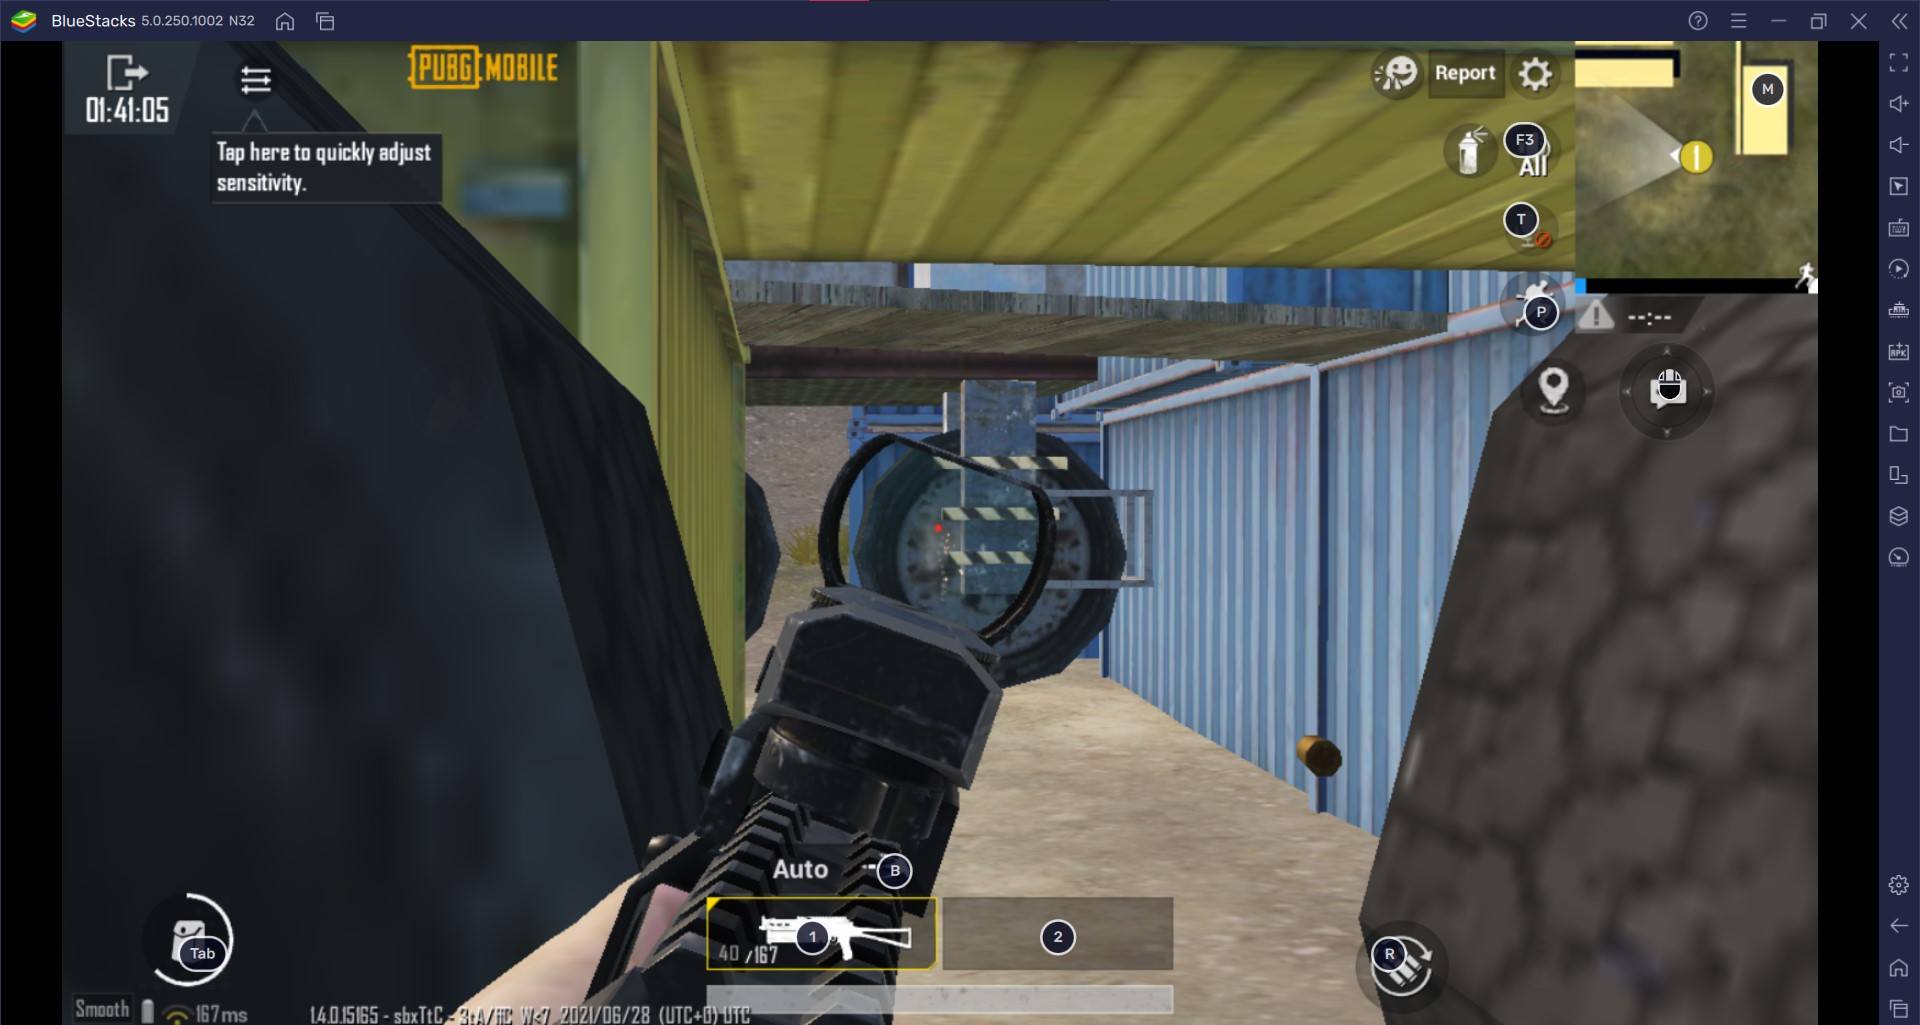 Dominating the Deathmatch: Guide to Team Deathmatch in PUBG Mobile